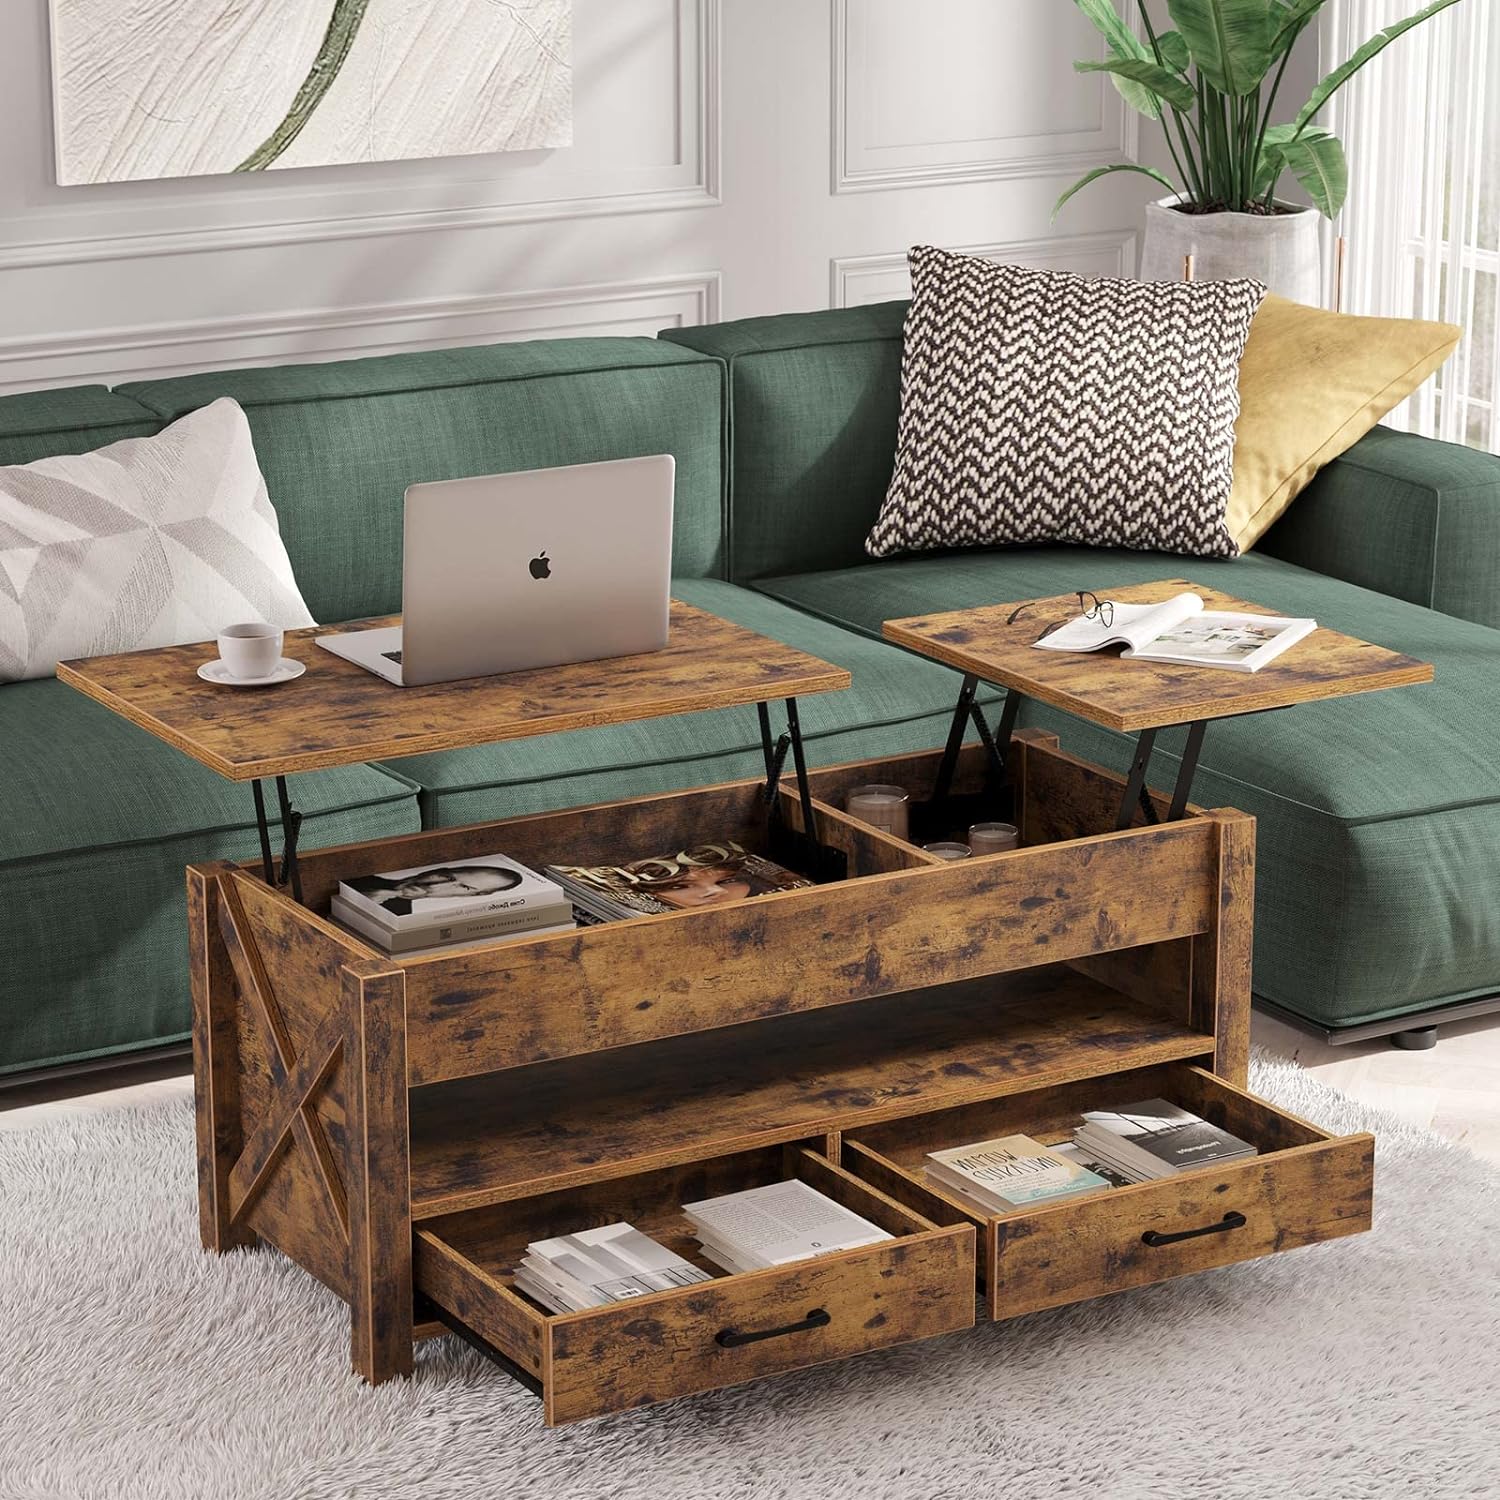 X Wood Farmhouse Support Seventable Lift Top Coffee Table 47.2 Coffee Table with Hidden Compartment Retro Center Table with Wooden Lift Tabletop for Living Room,Espresso